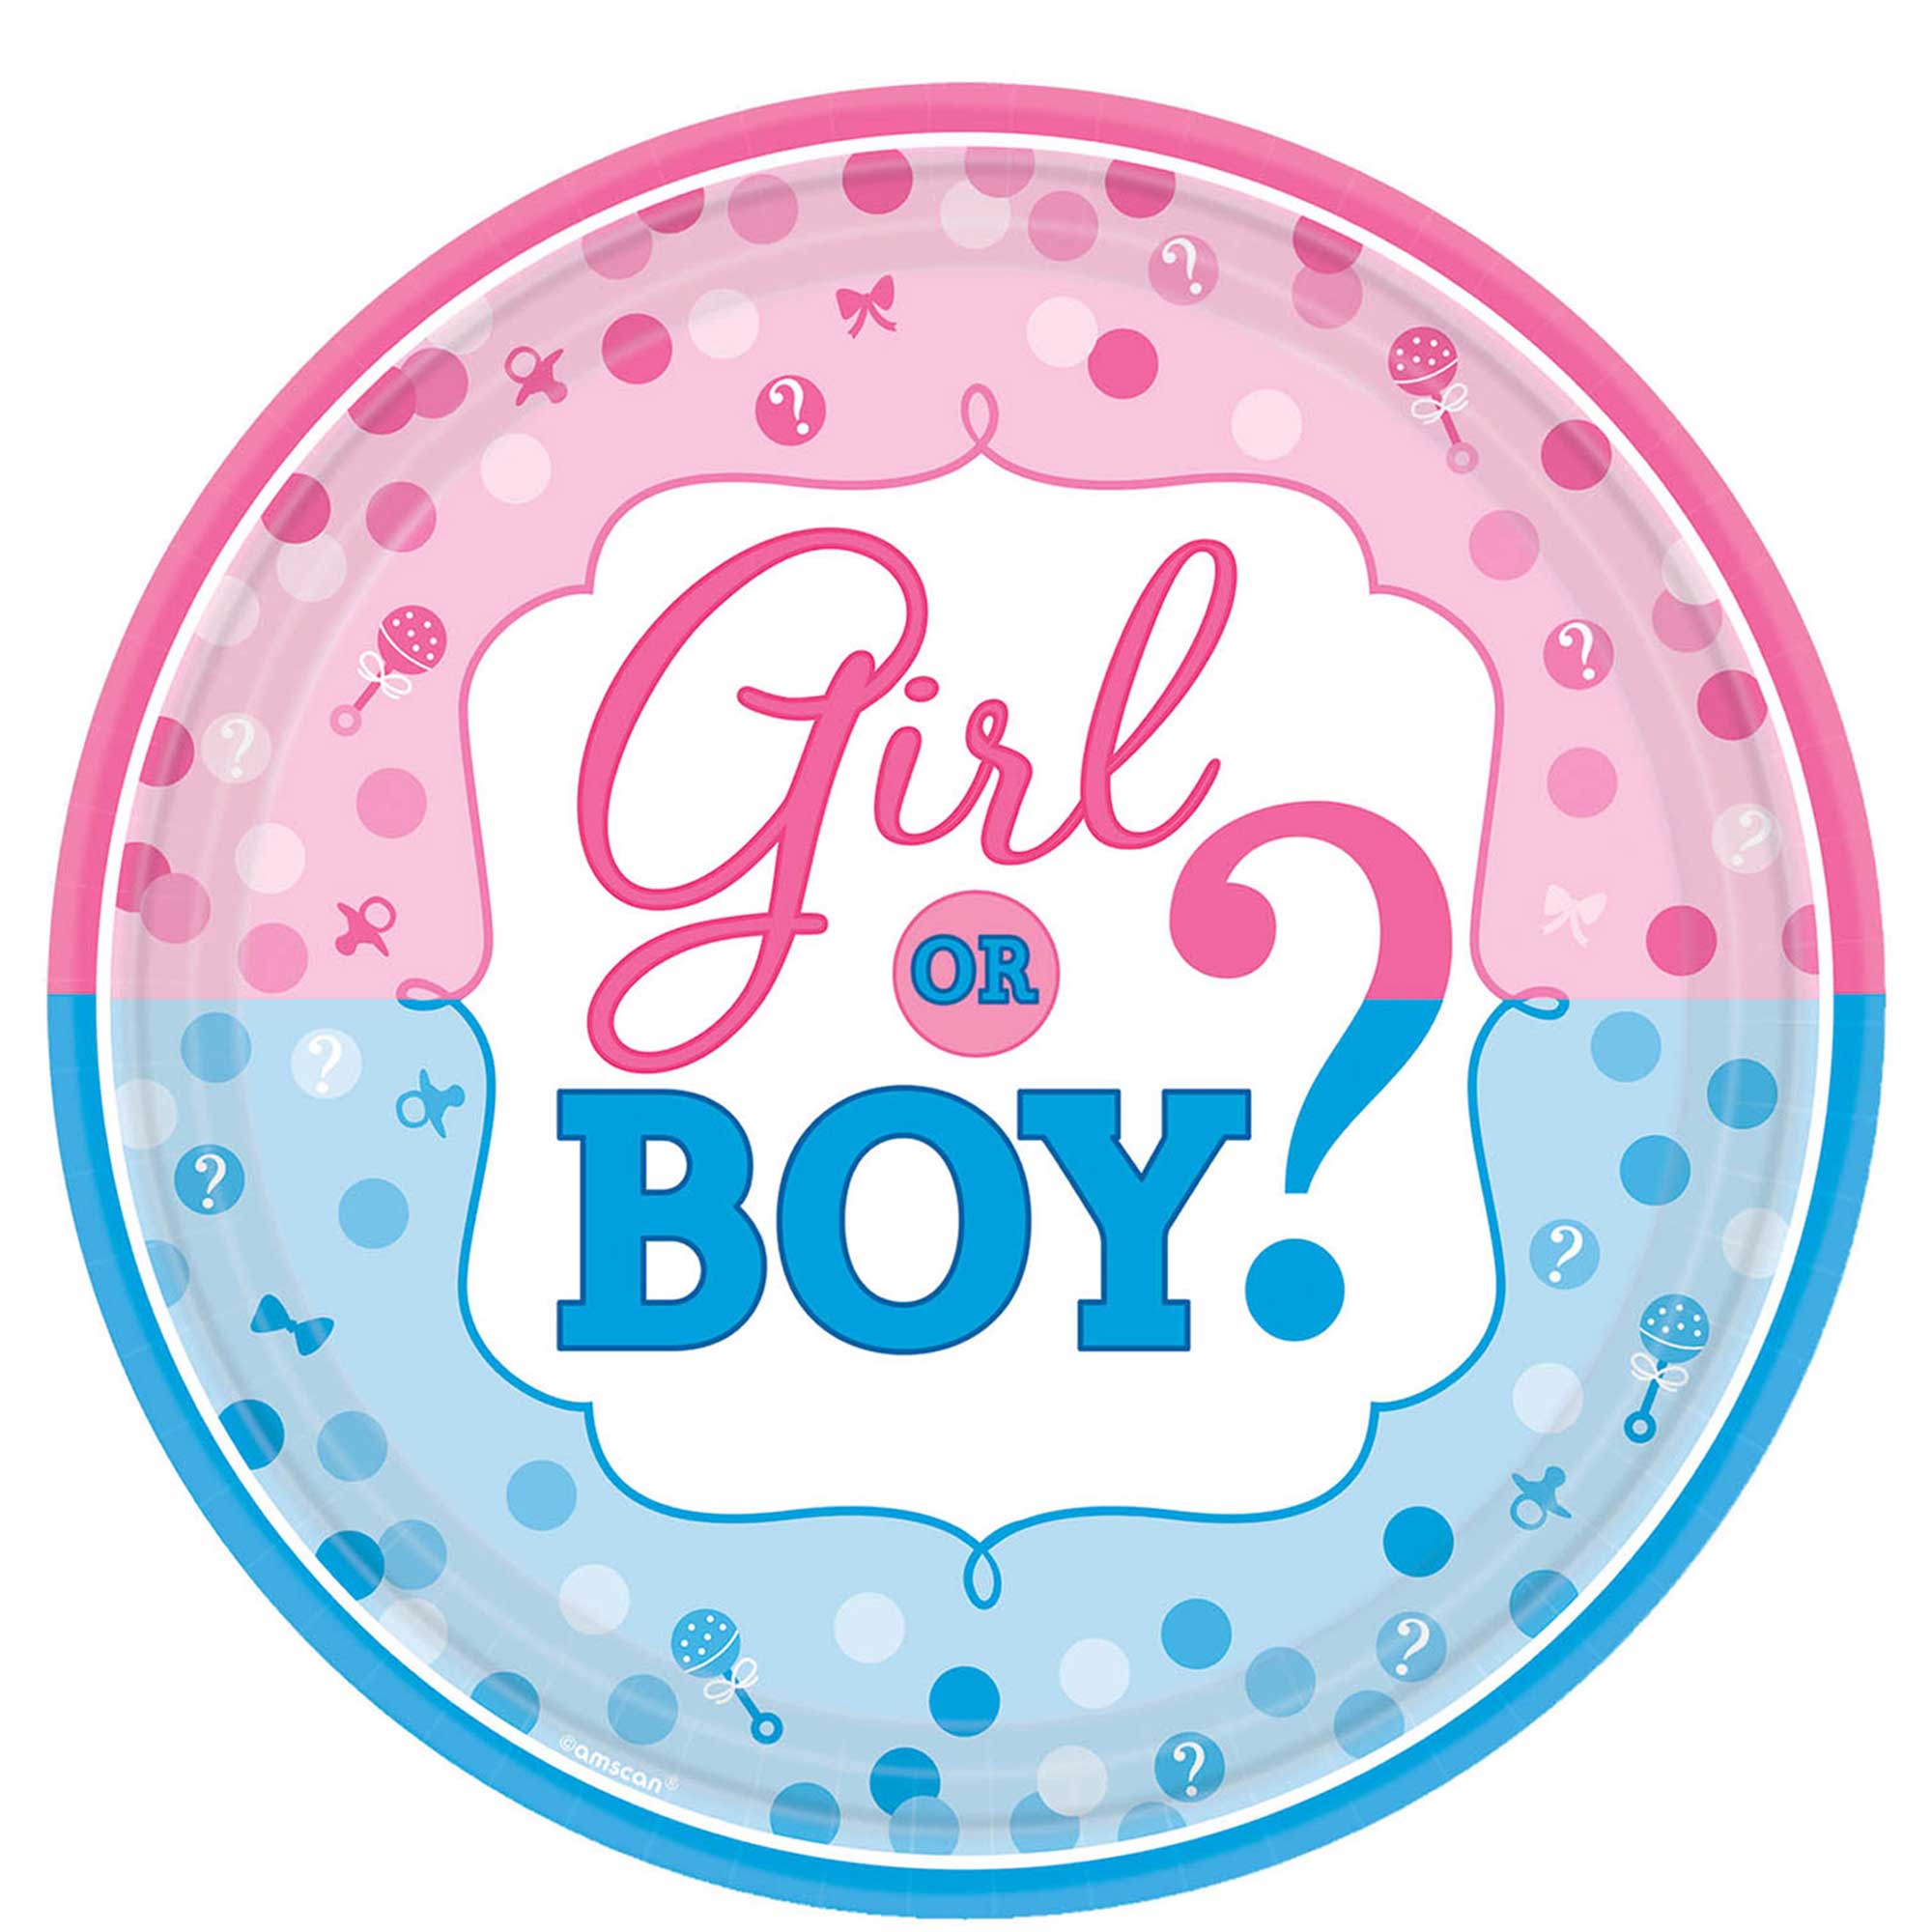 Girl Or Boy? Round Paper Plates 10.50in, 8pcs Printed Tableware - Party Centre